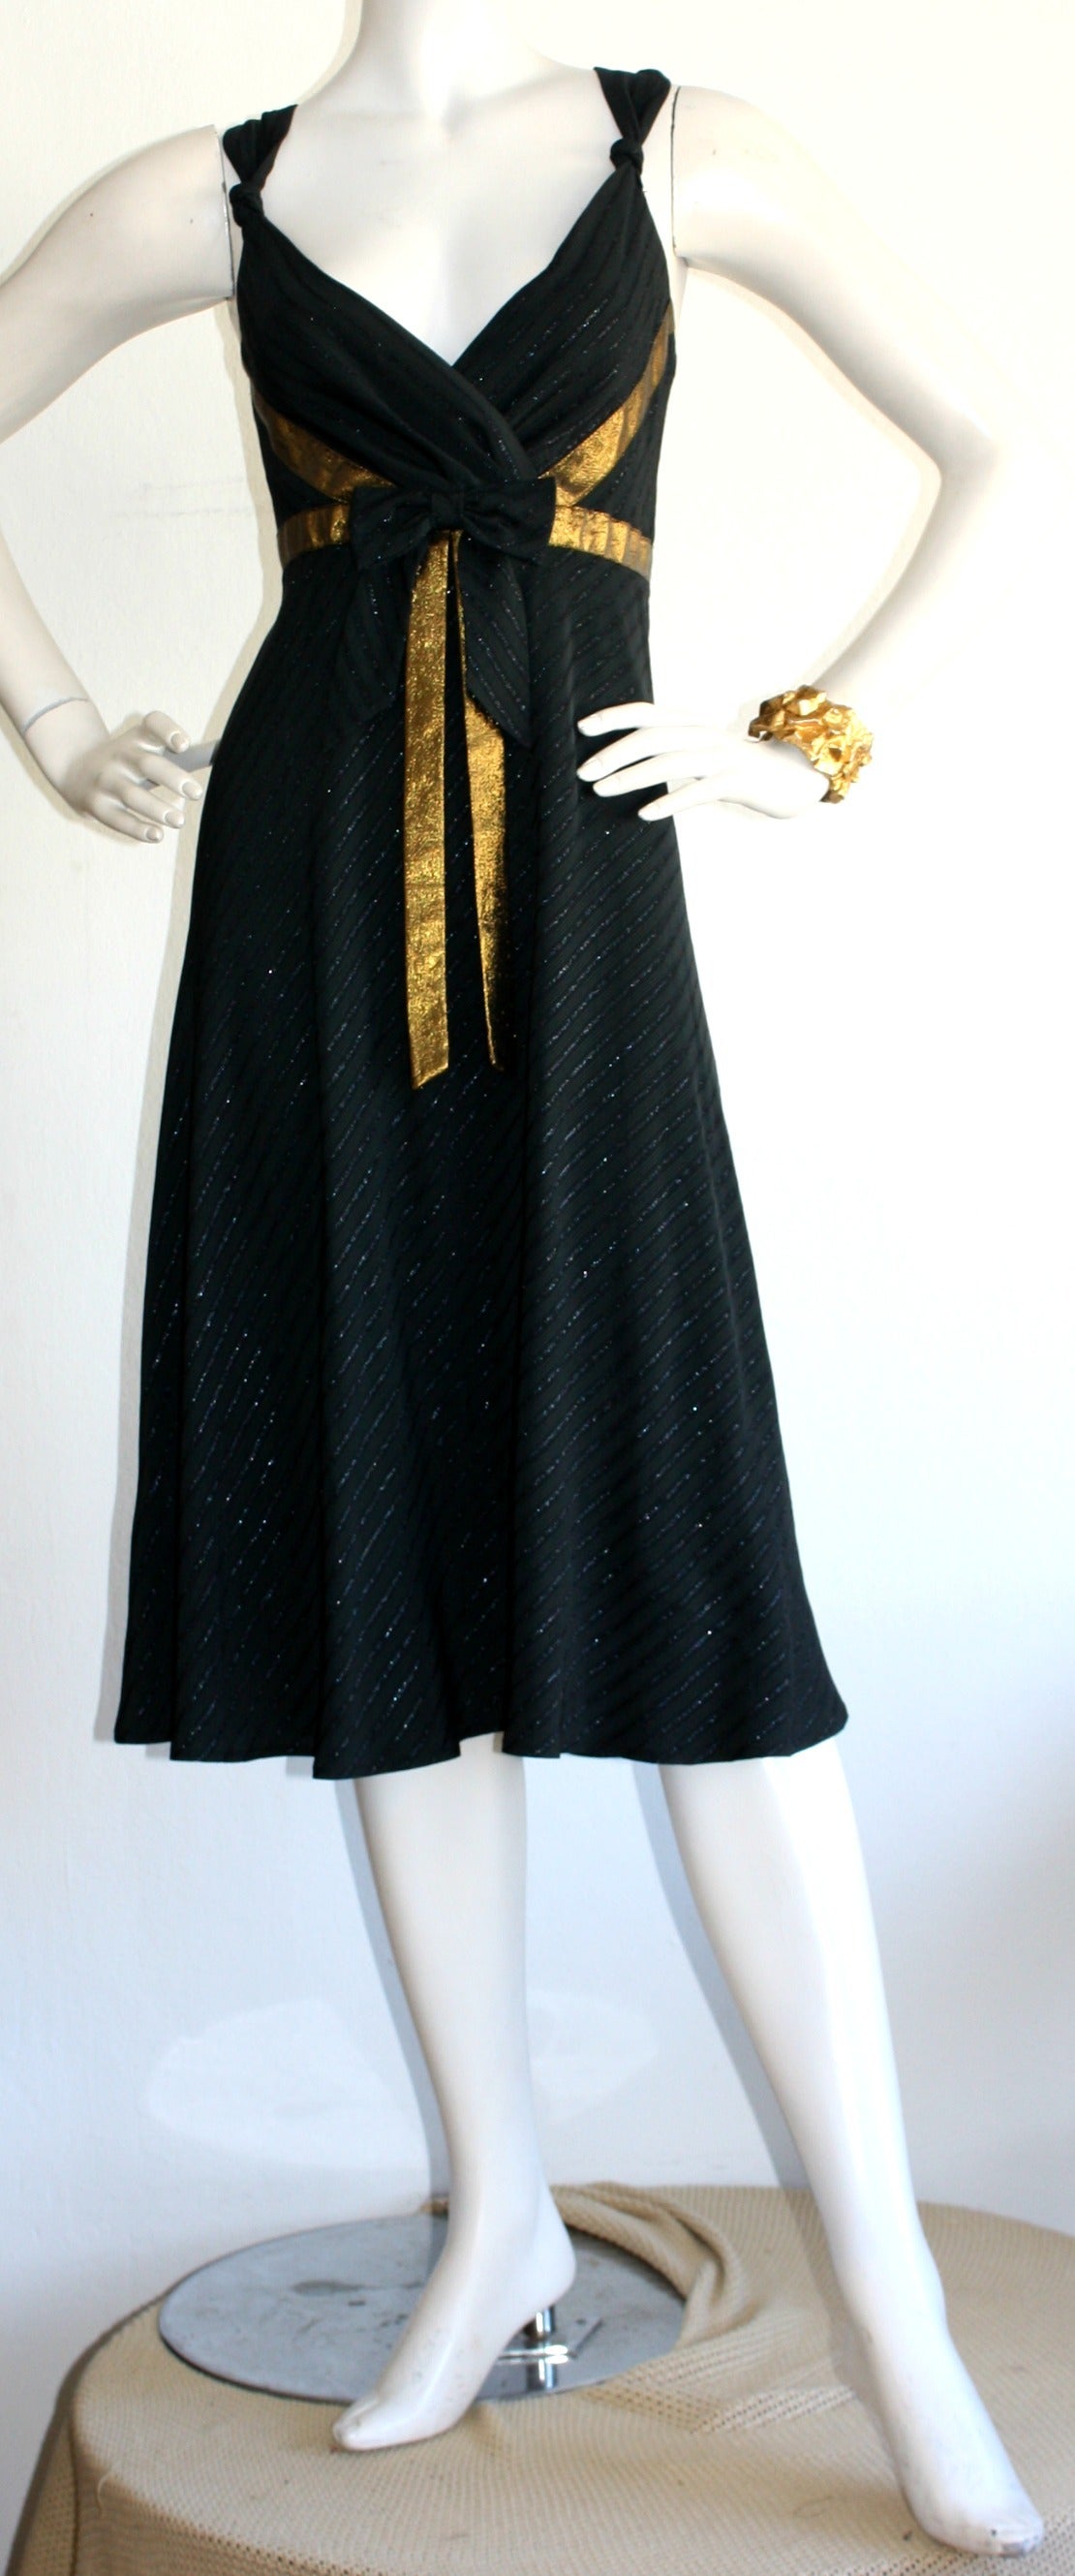 Shine at any holiday party this metallic Marc Jacobs Runway dress! Features black metallic criss-cross stripes on black silk. Chic gold/bronze bow at waist. In great condition. Size 8

Measurements:
38-40 inch bust
30 inch waist
Free Hips
45